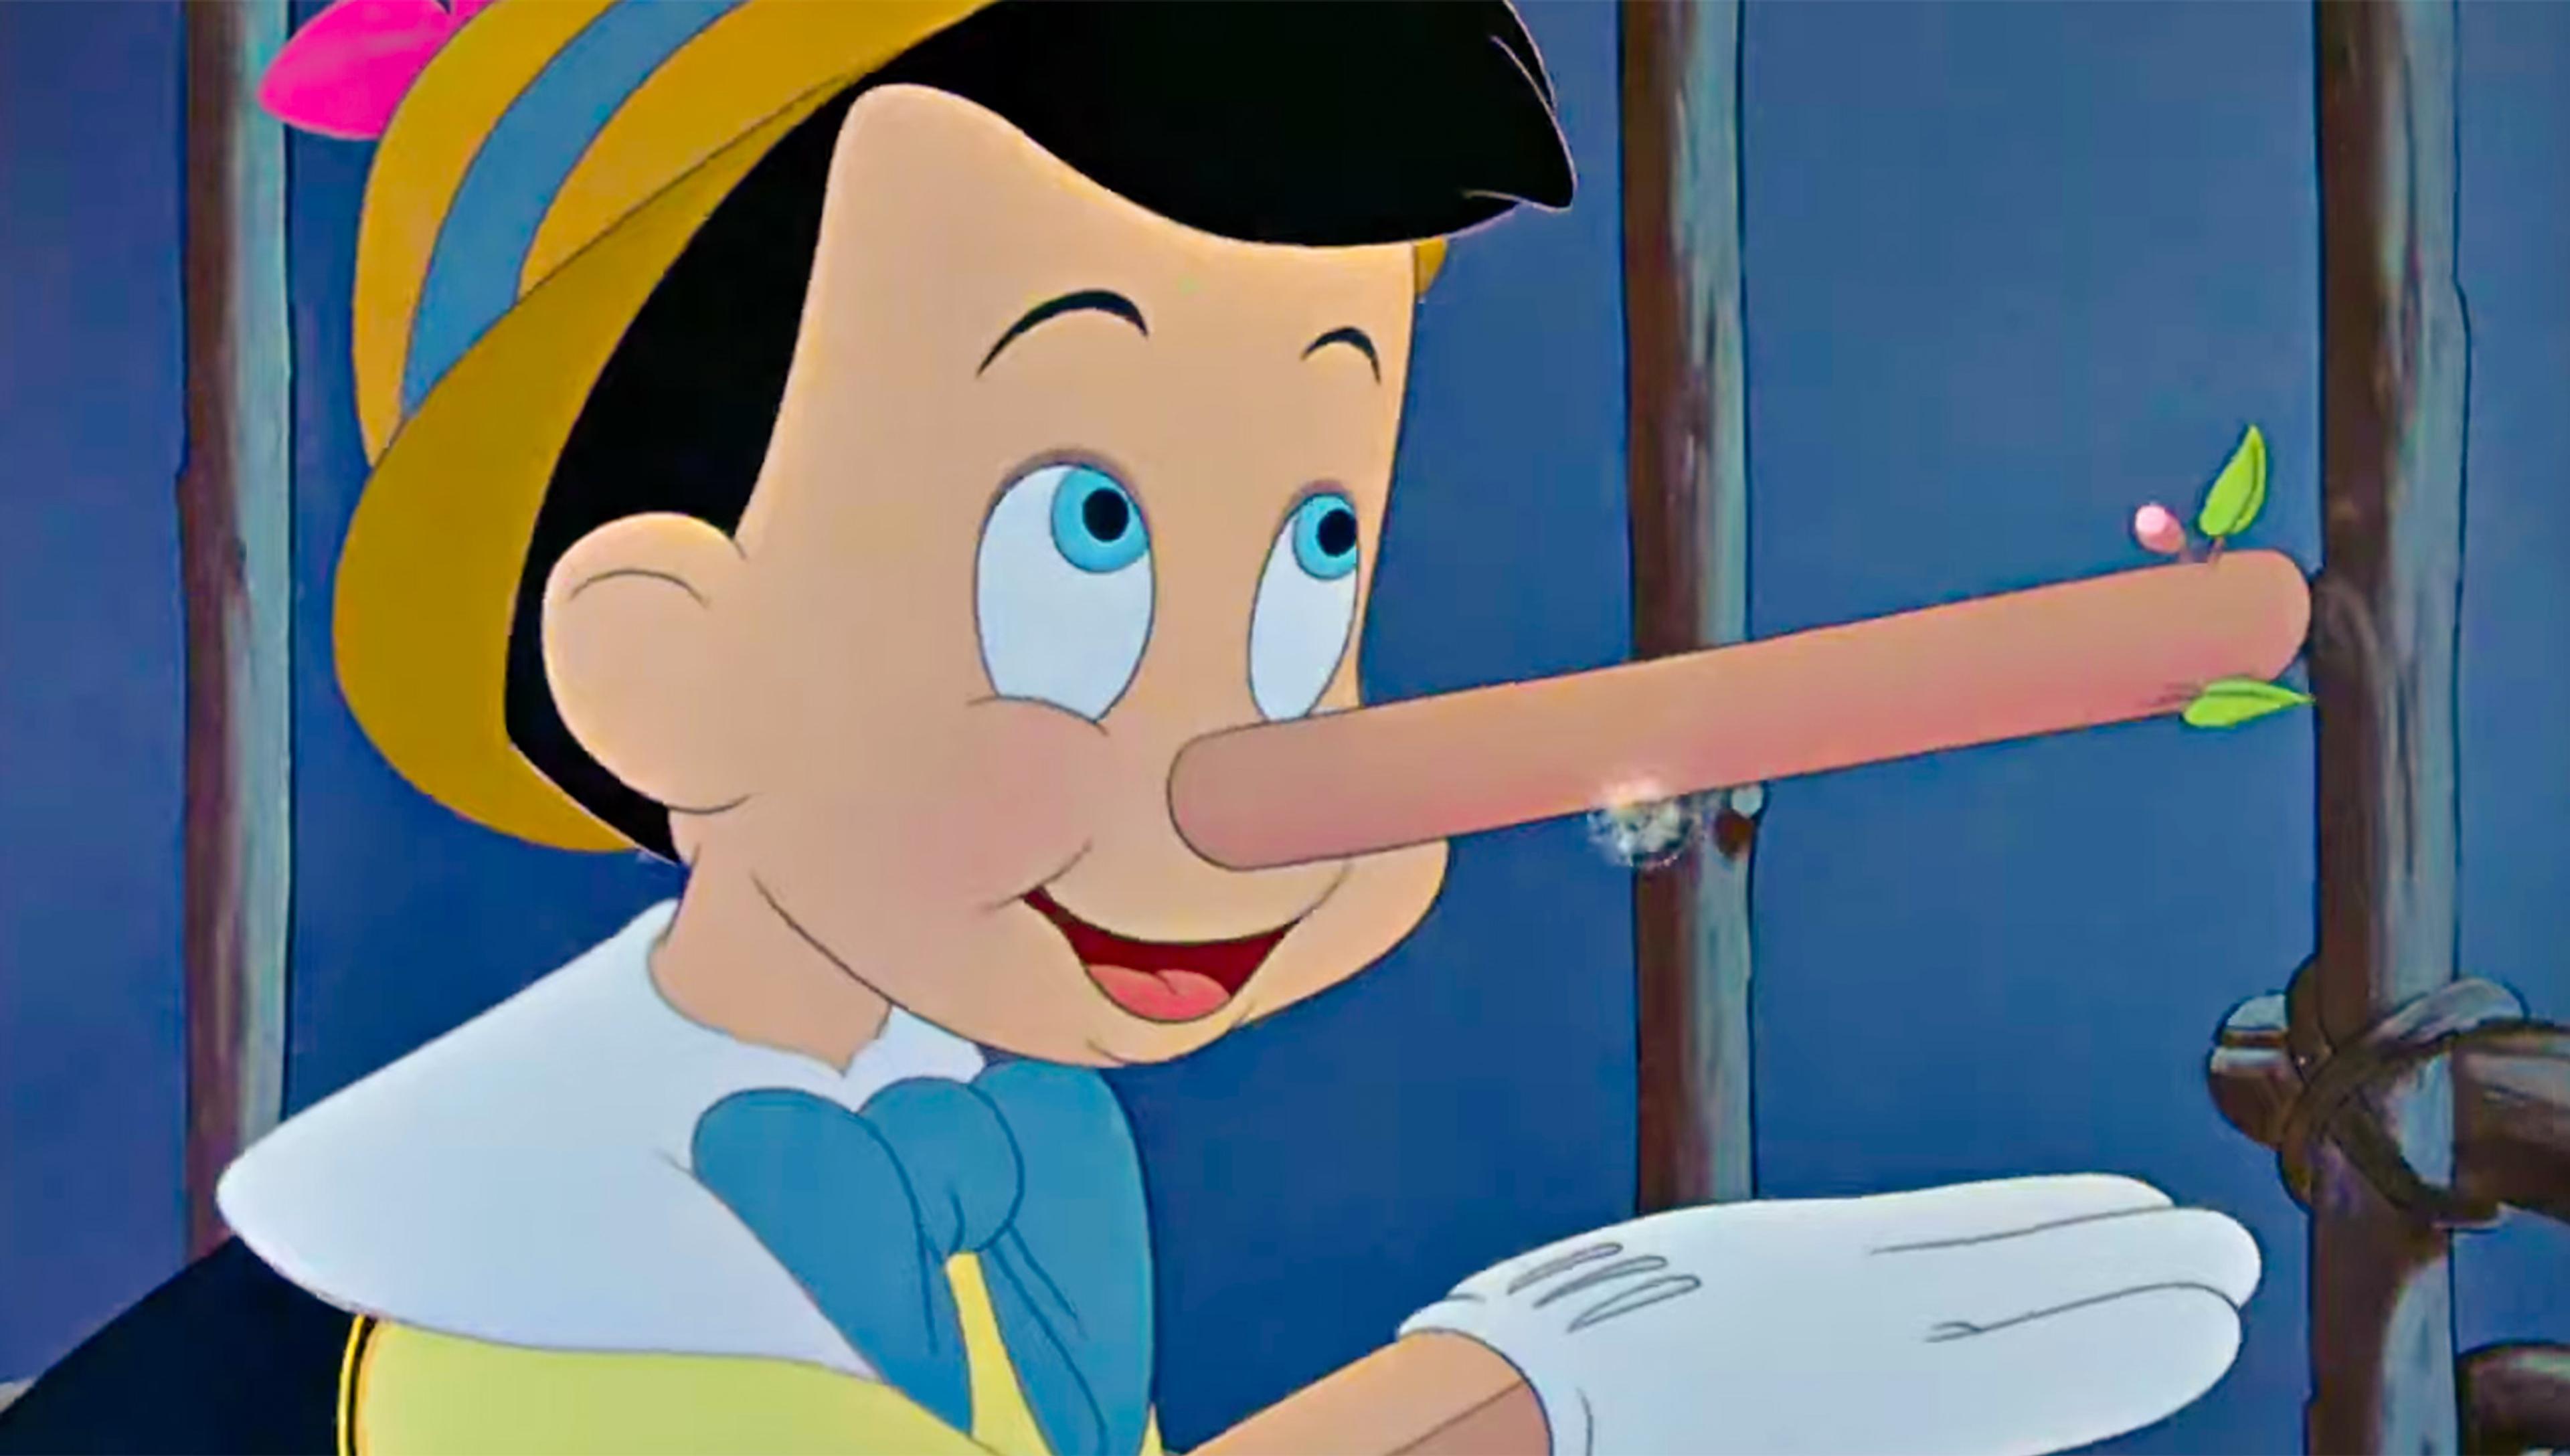 The Disney cartoon boy Pinocchio depicted with his nose having grown long as he tells a lie